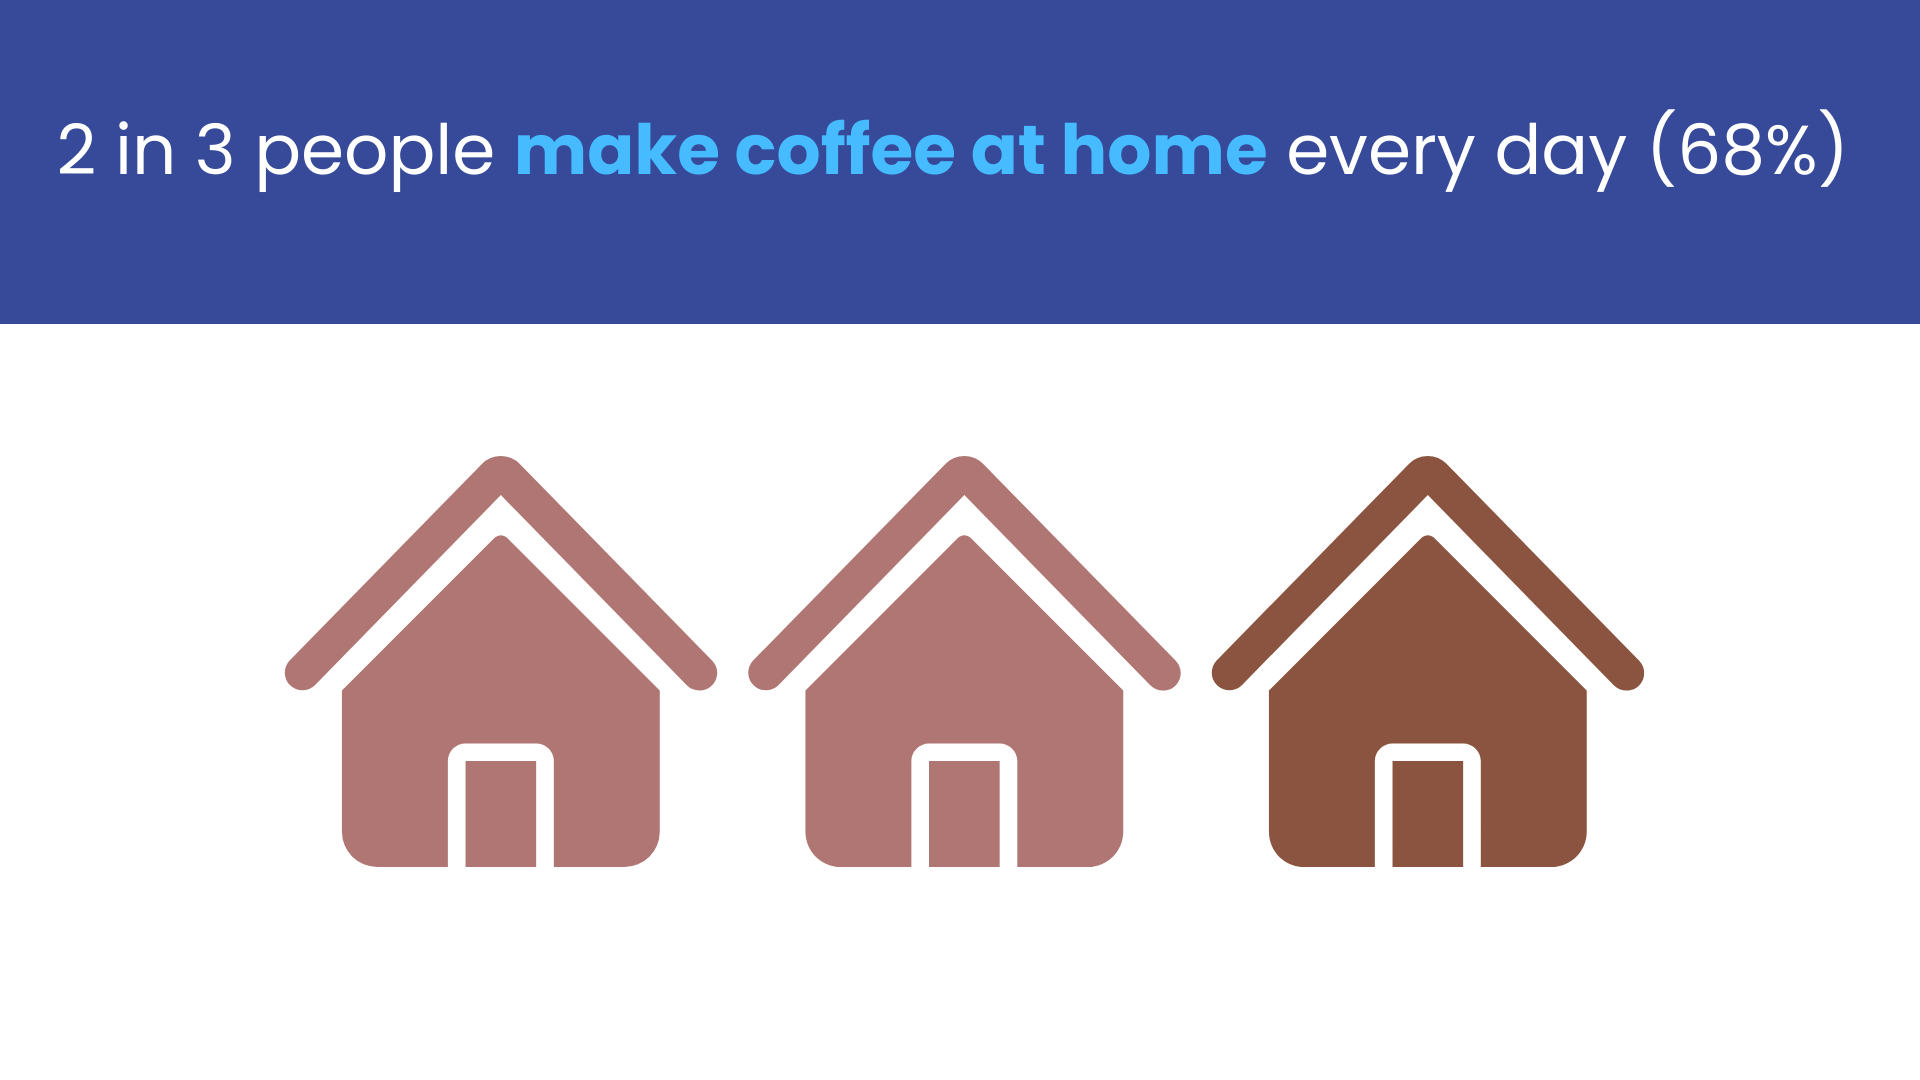 2 in 3 Americans make coffee at home every day.